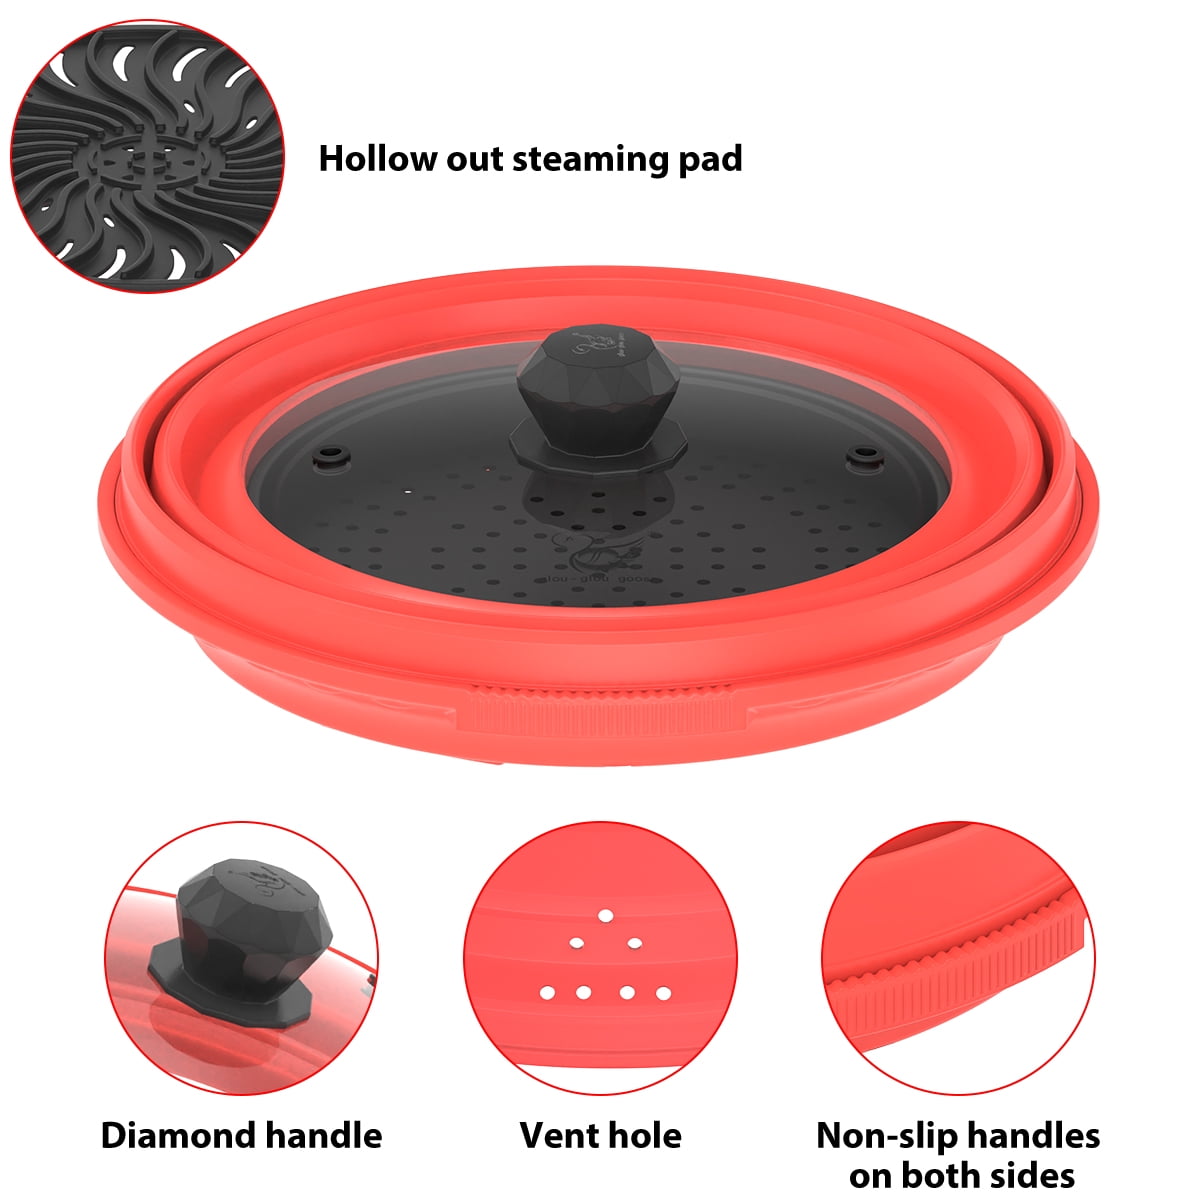 GLOU-GLOU GOOSE GGG iSH09-M673282mn Microwave Splatter Silicone Cover  Collapsible Steamer, Vented Multifunction Splash Lid with Glass Dish Bowl  Plate for Food Cook